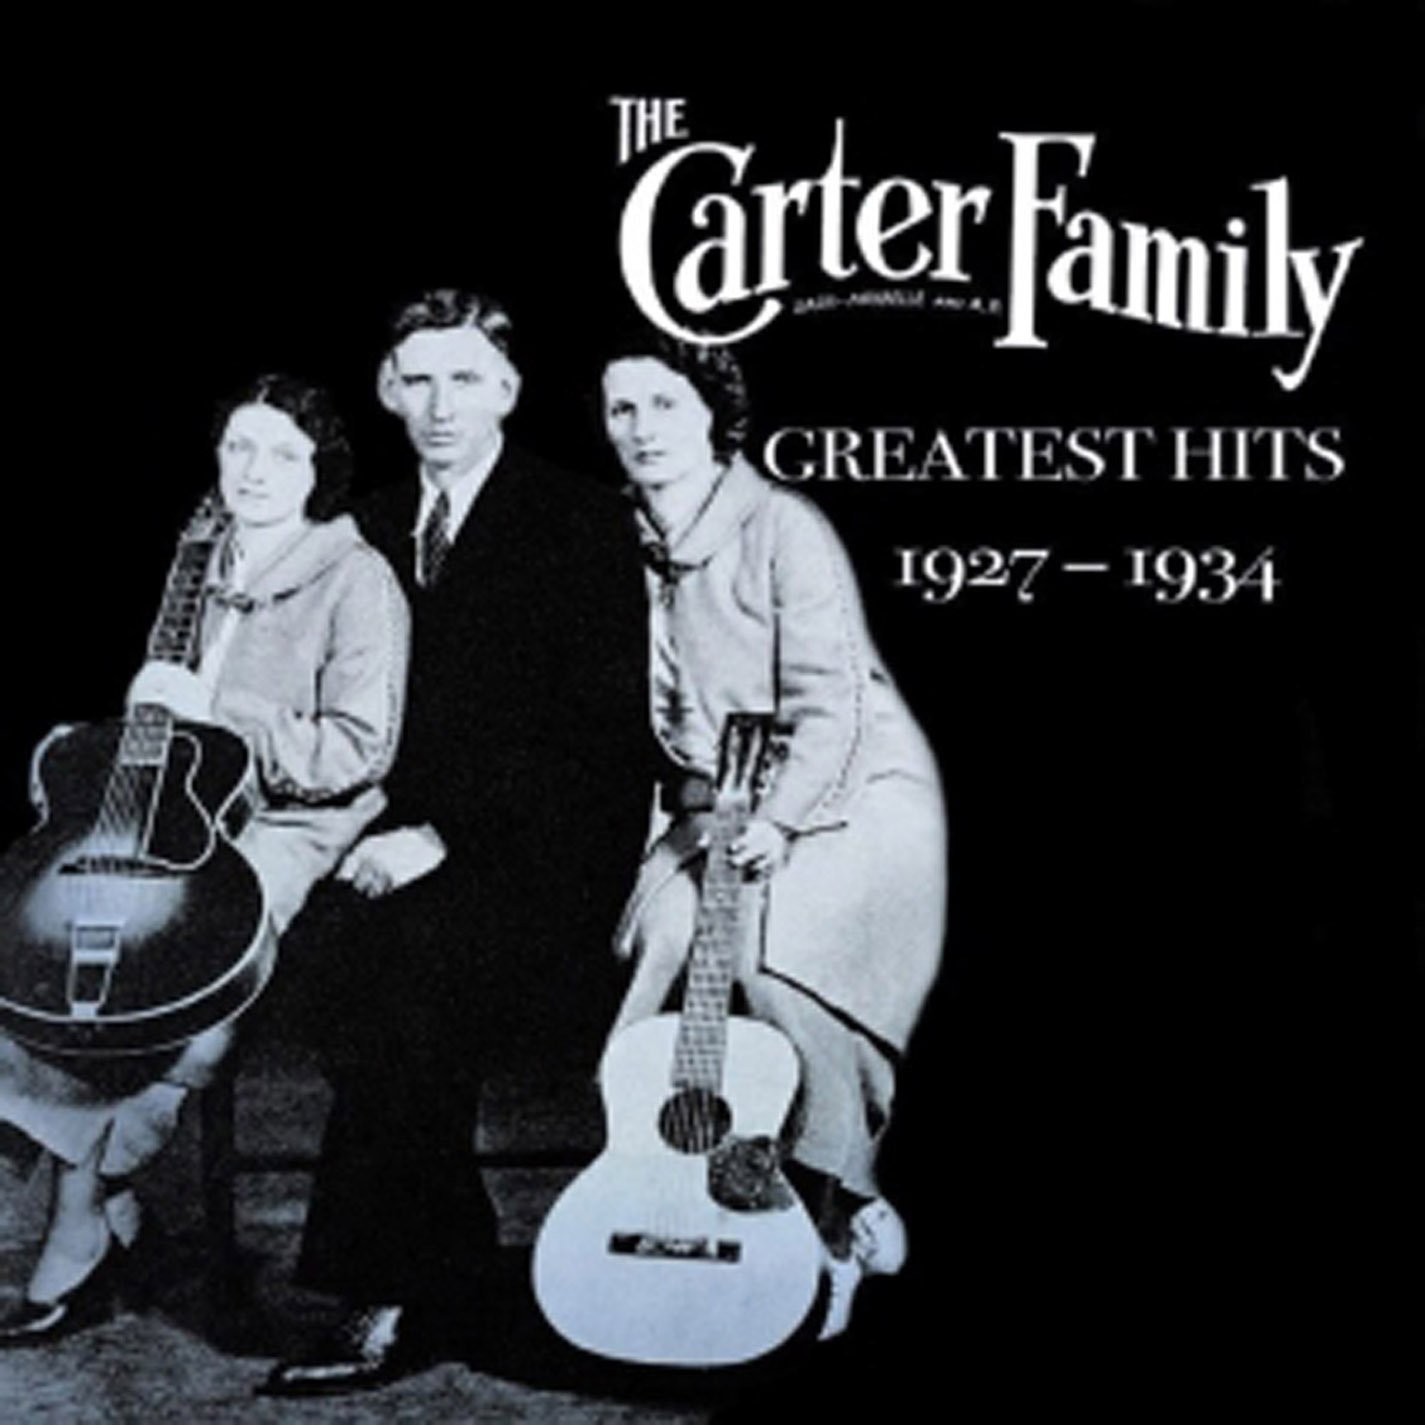 CD The Carter Family - Greatest hits 1927 - 1934